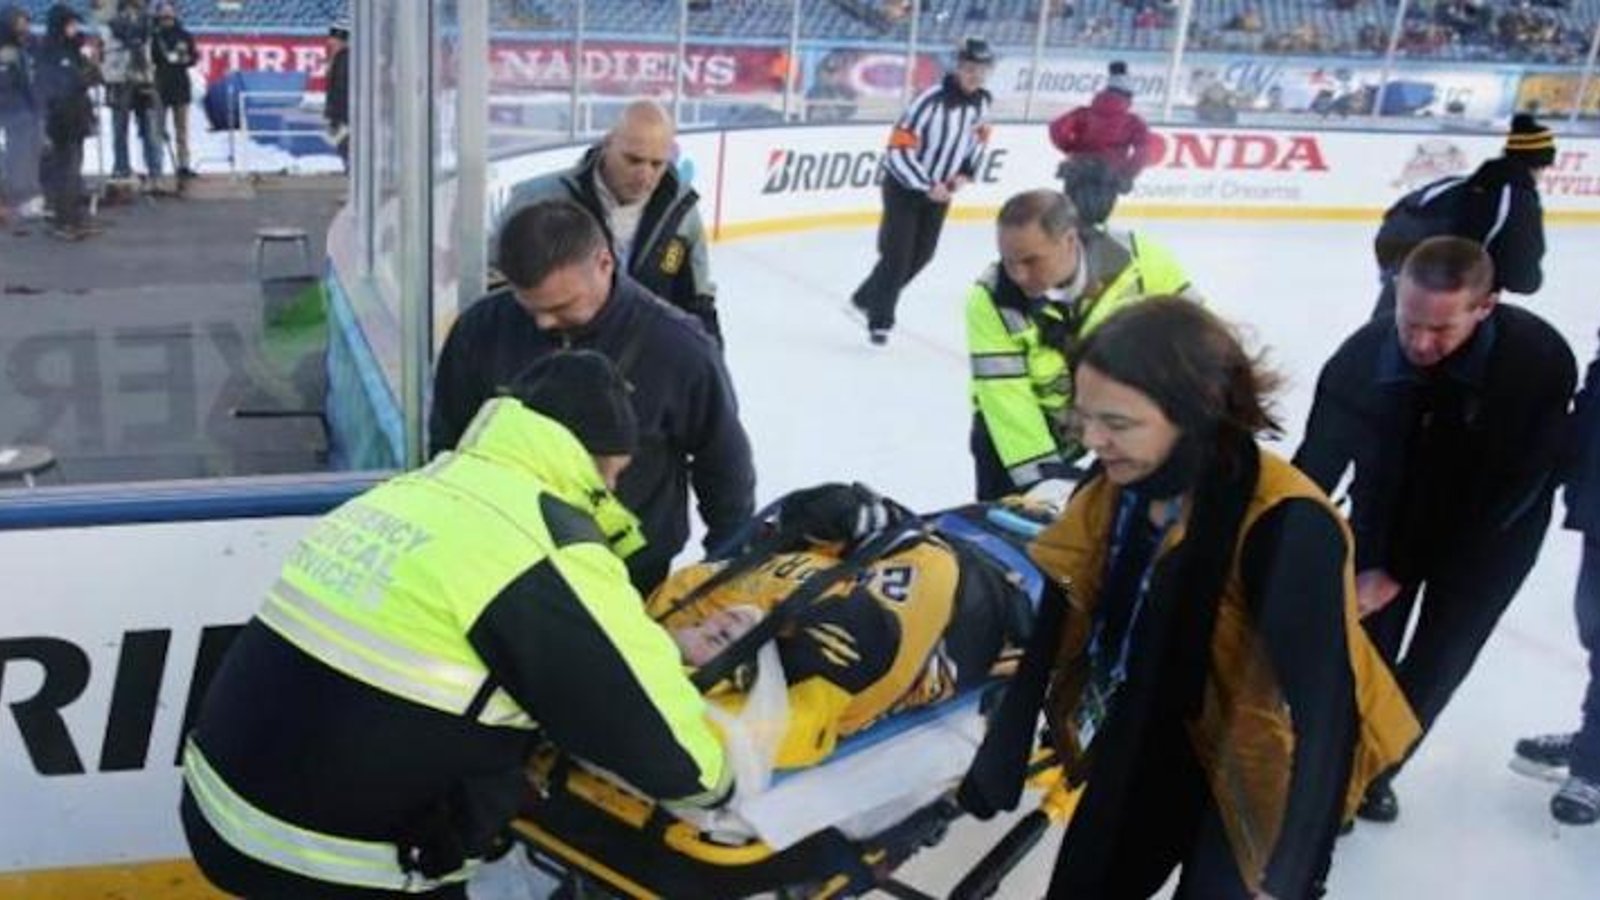 Player suffered spinal cord injury at Winter Classic.